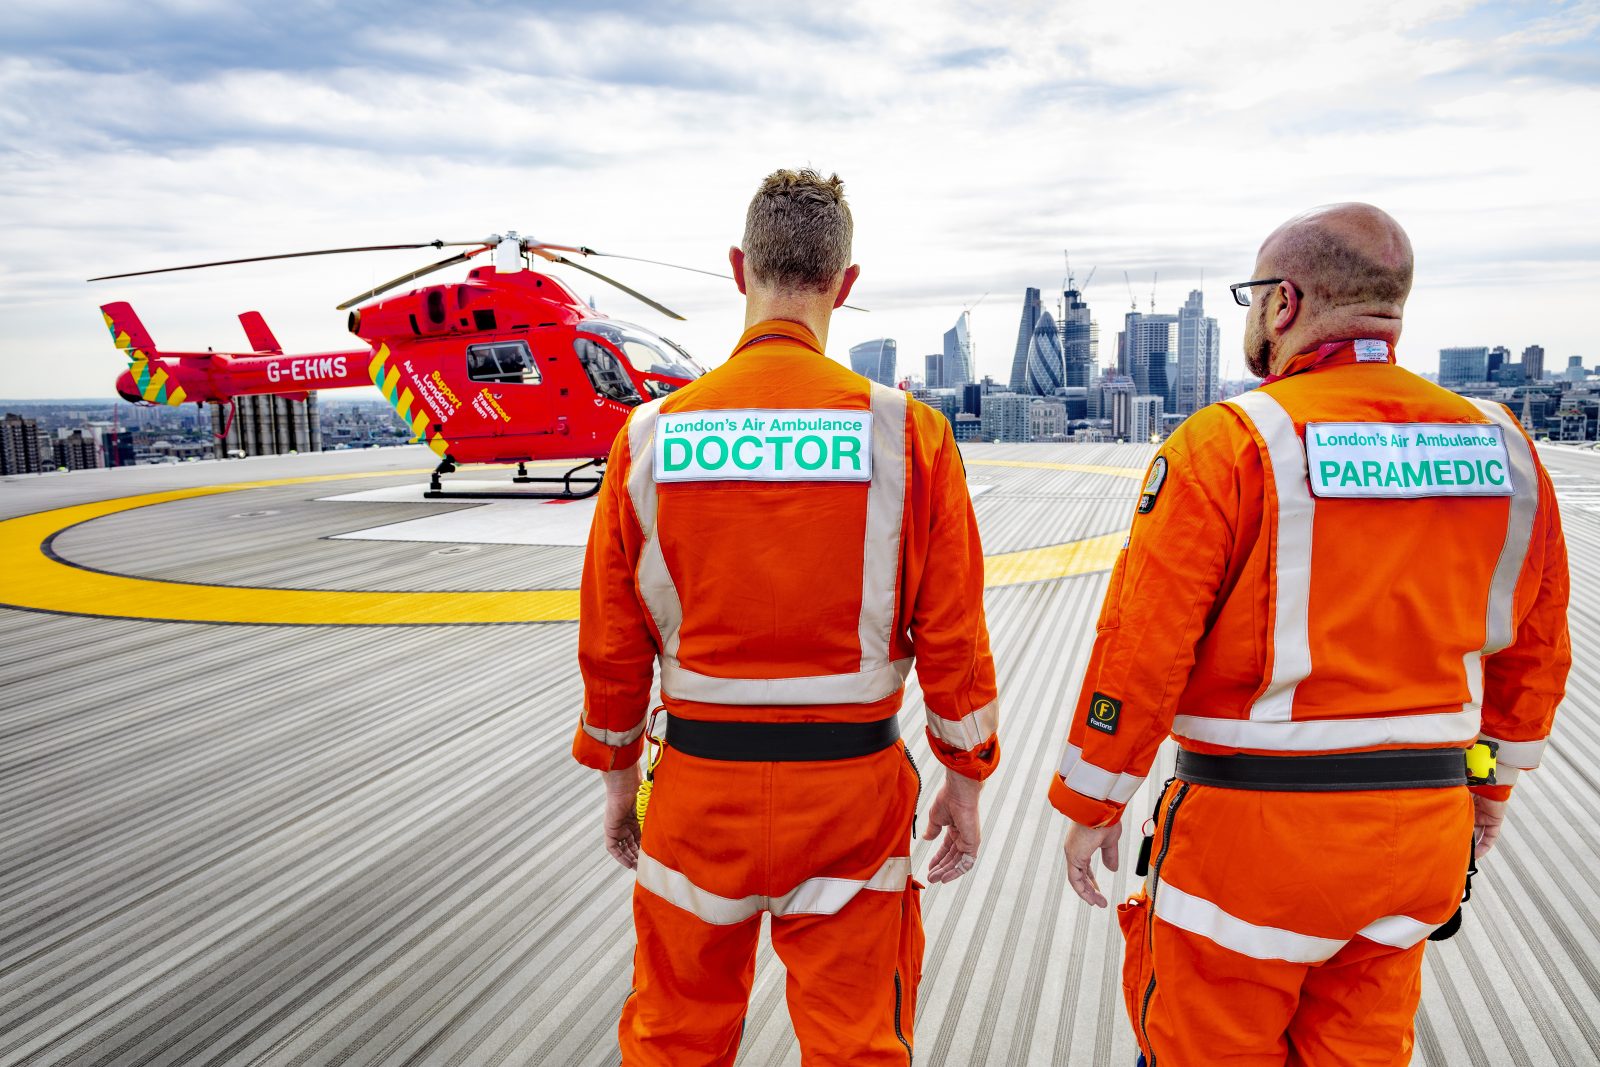 Two paramedics stand on a helipad in front of a helicopter